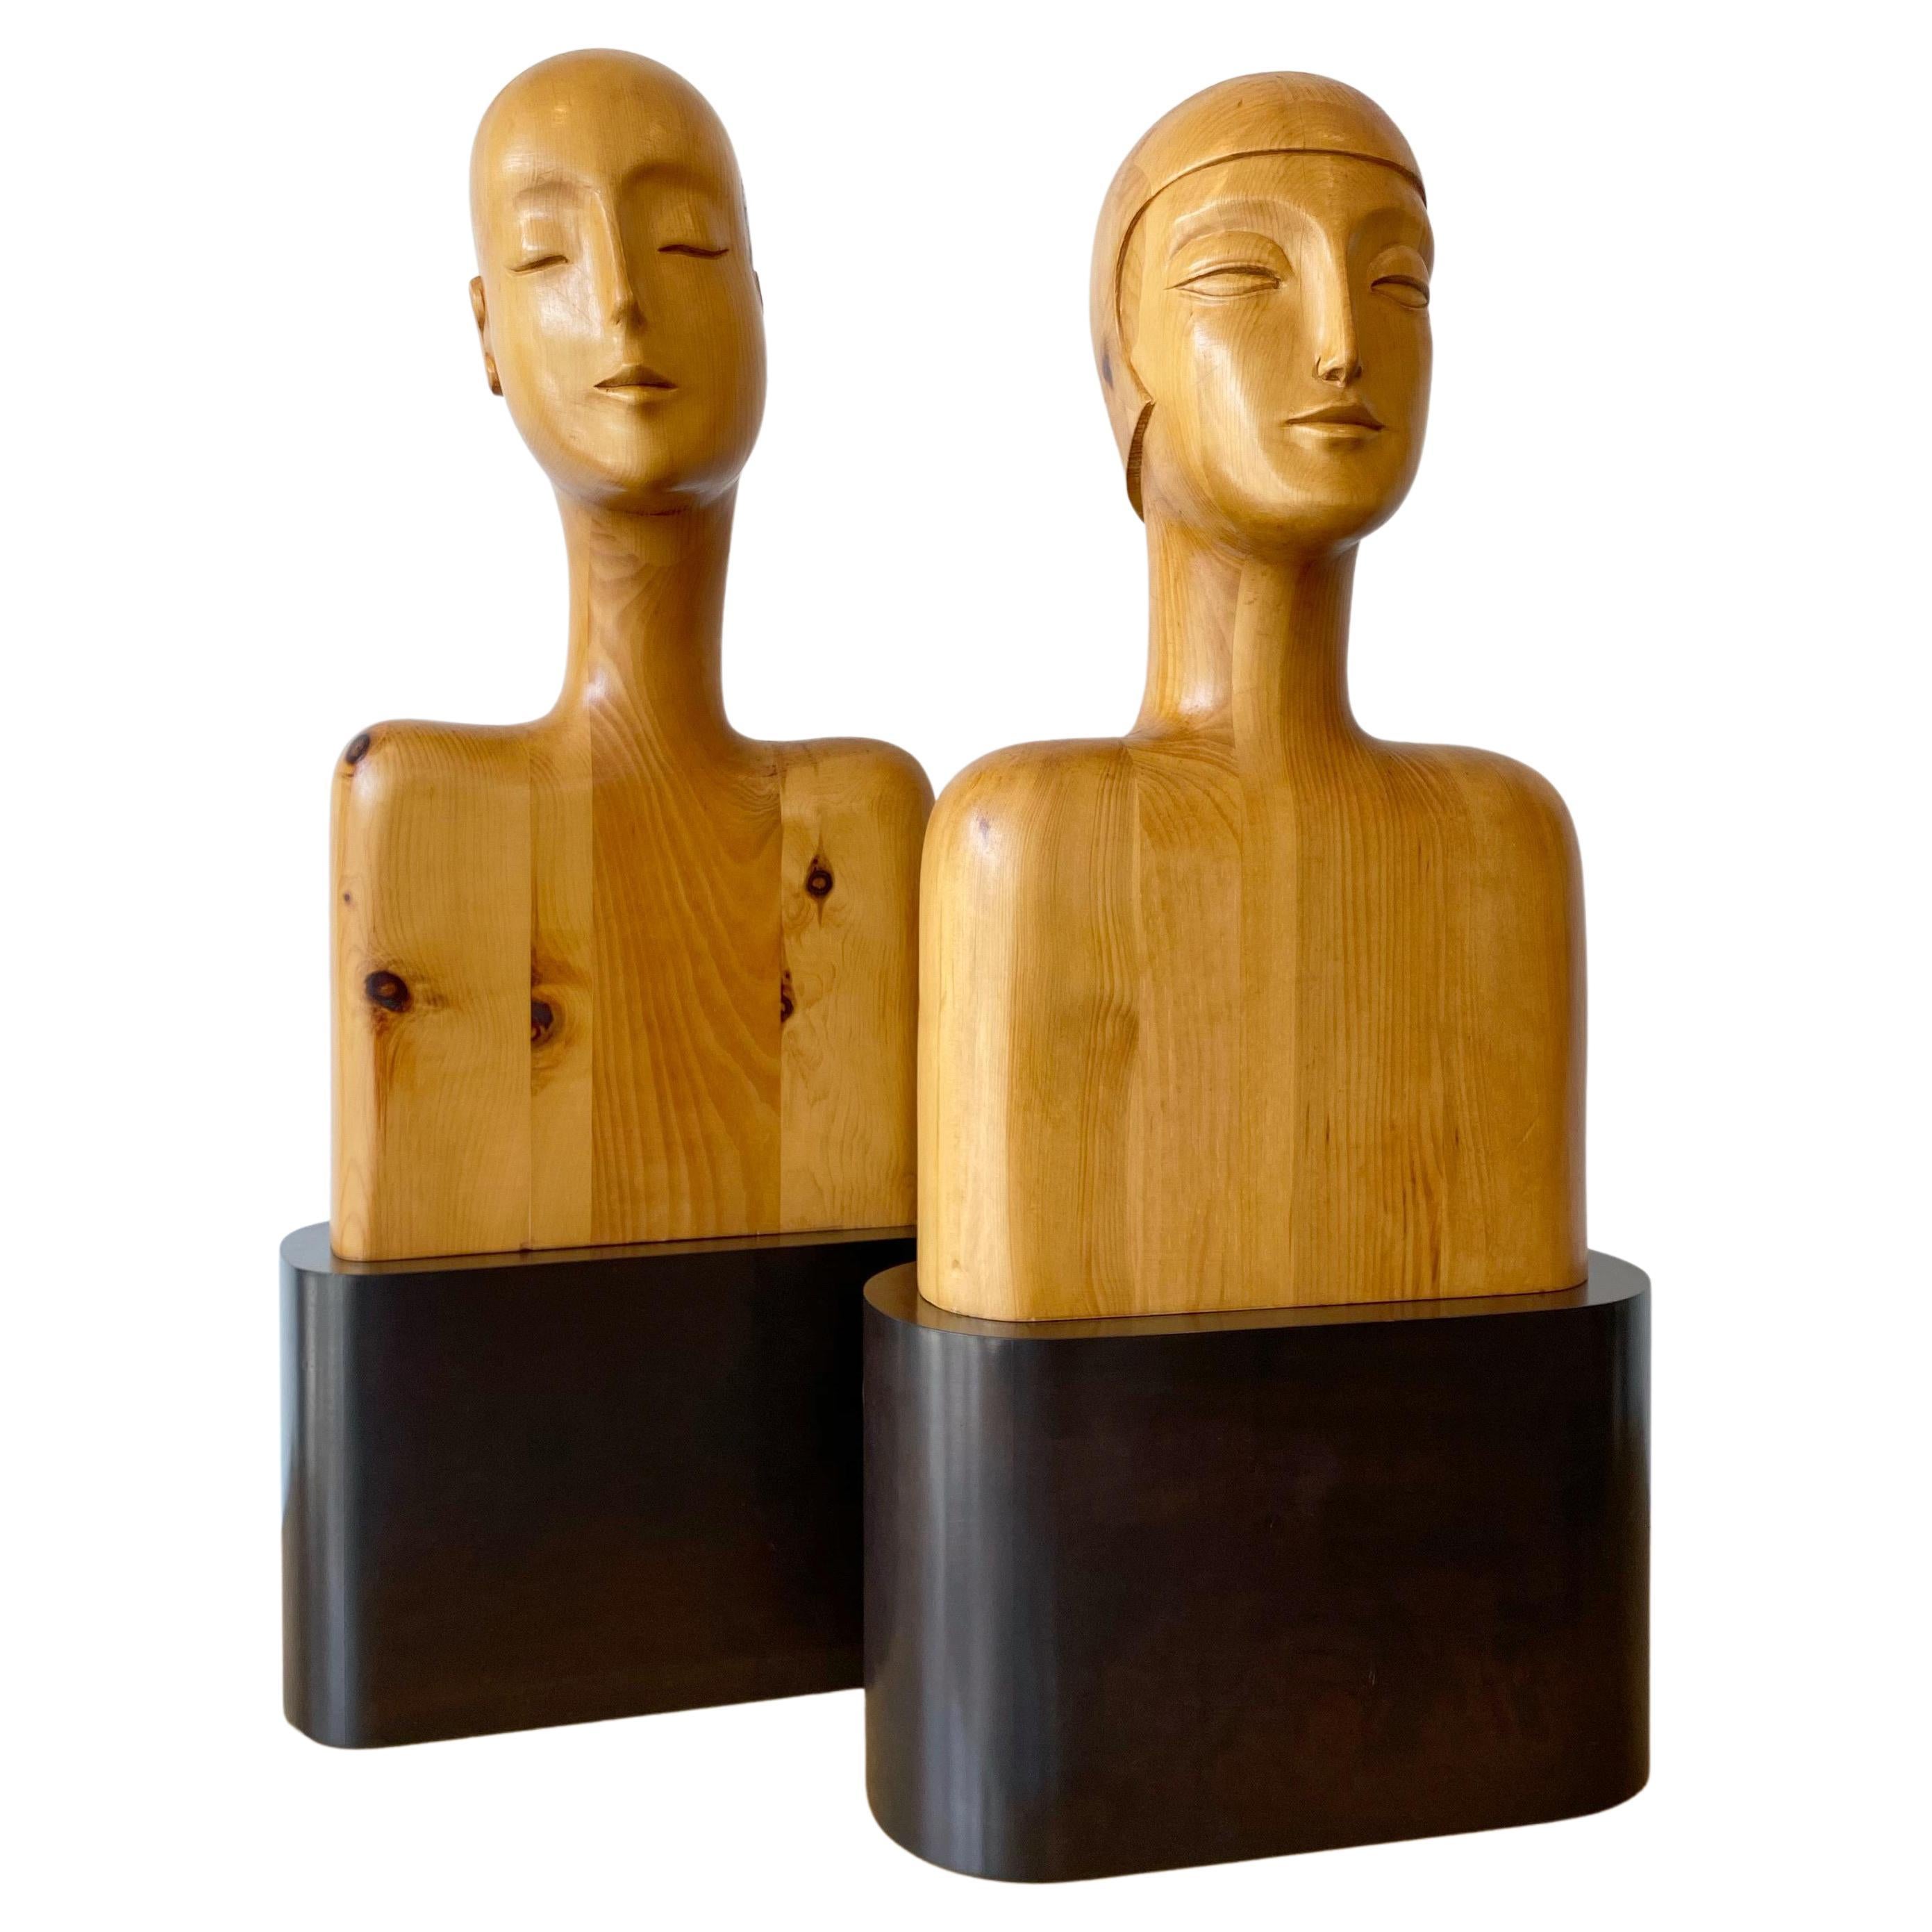 Carved Wood Art Deco Style Busts on Plinth Bases, a Pair